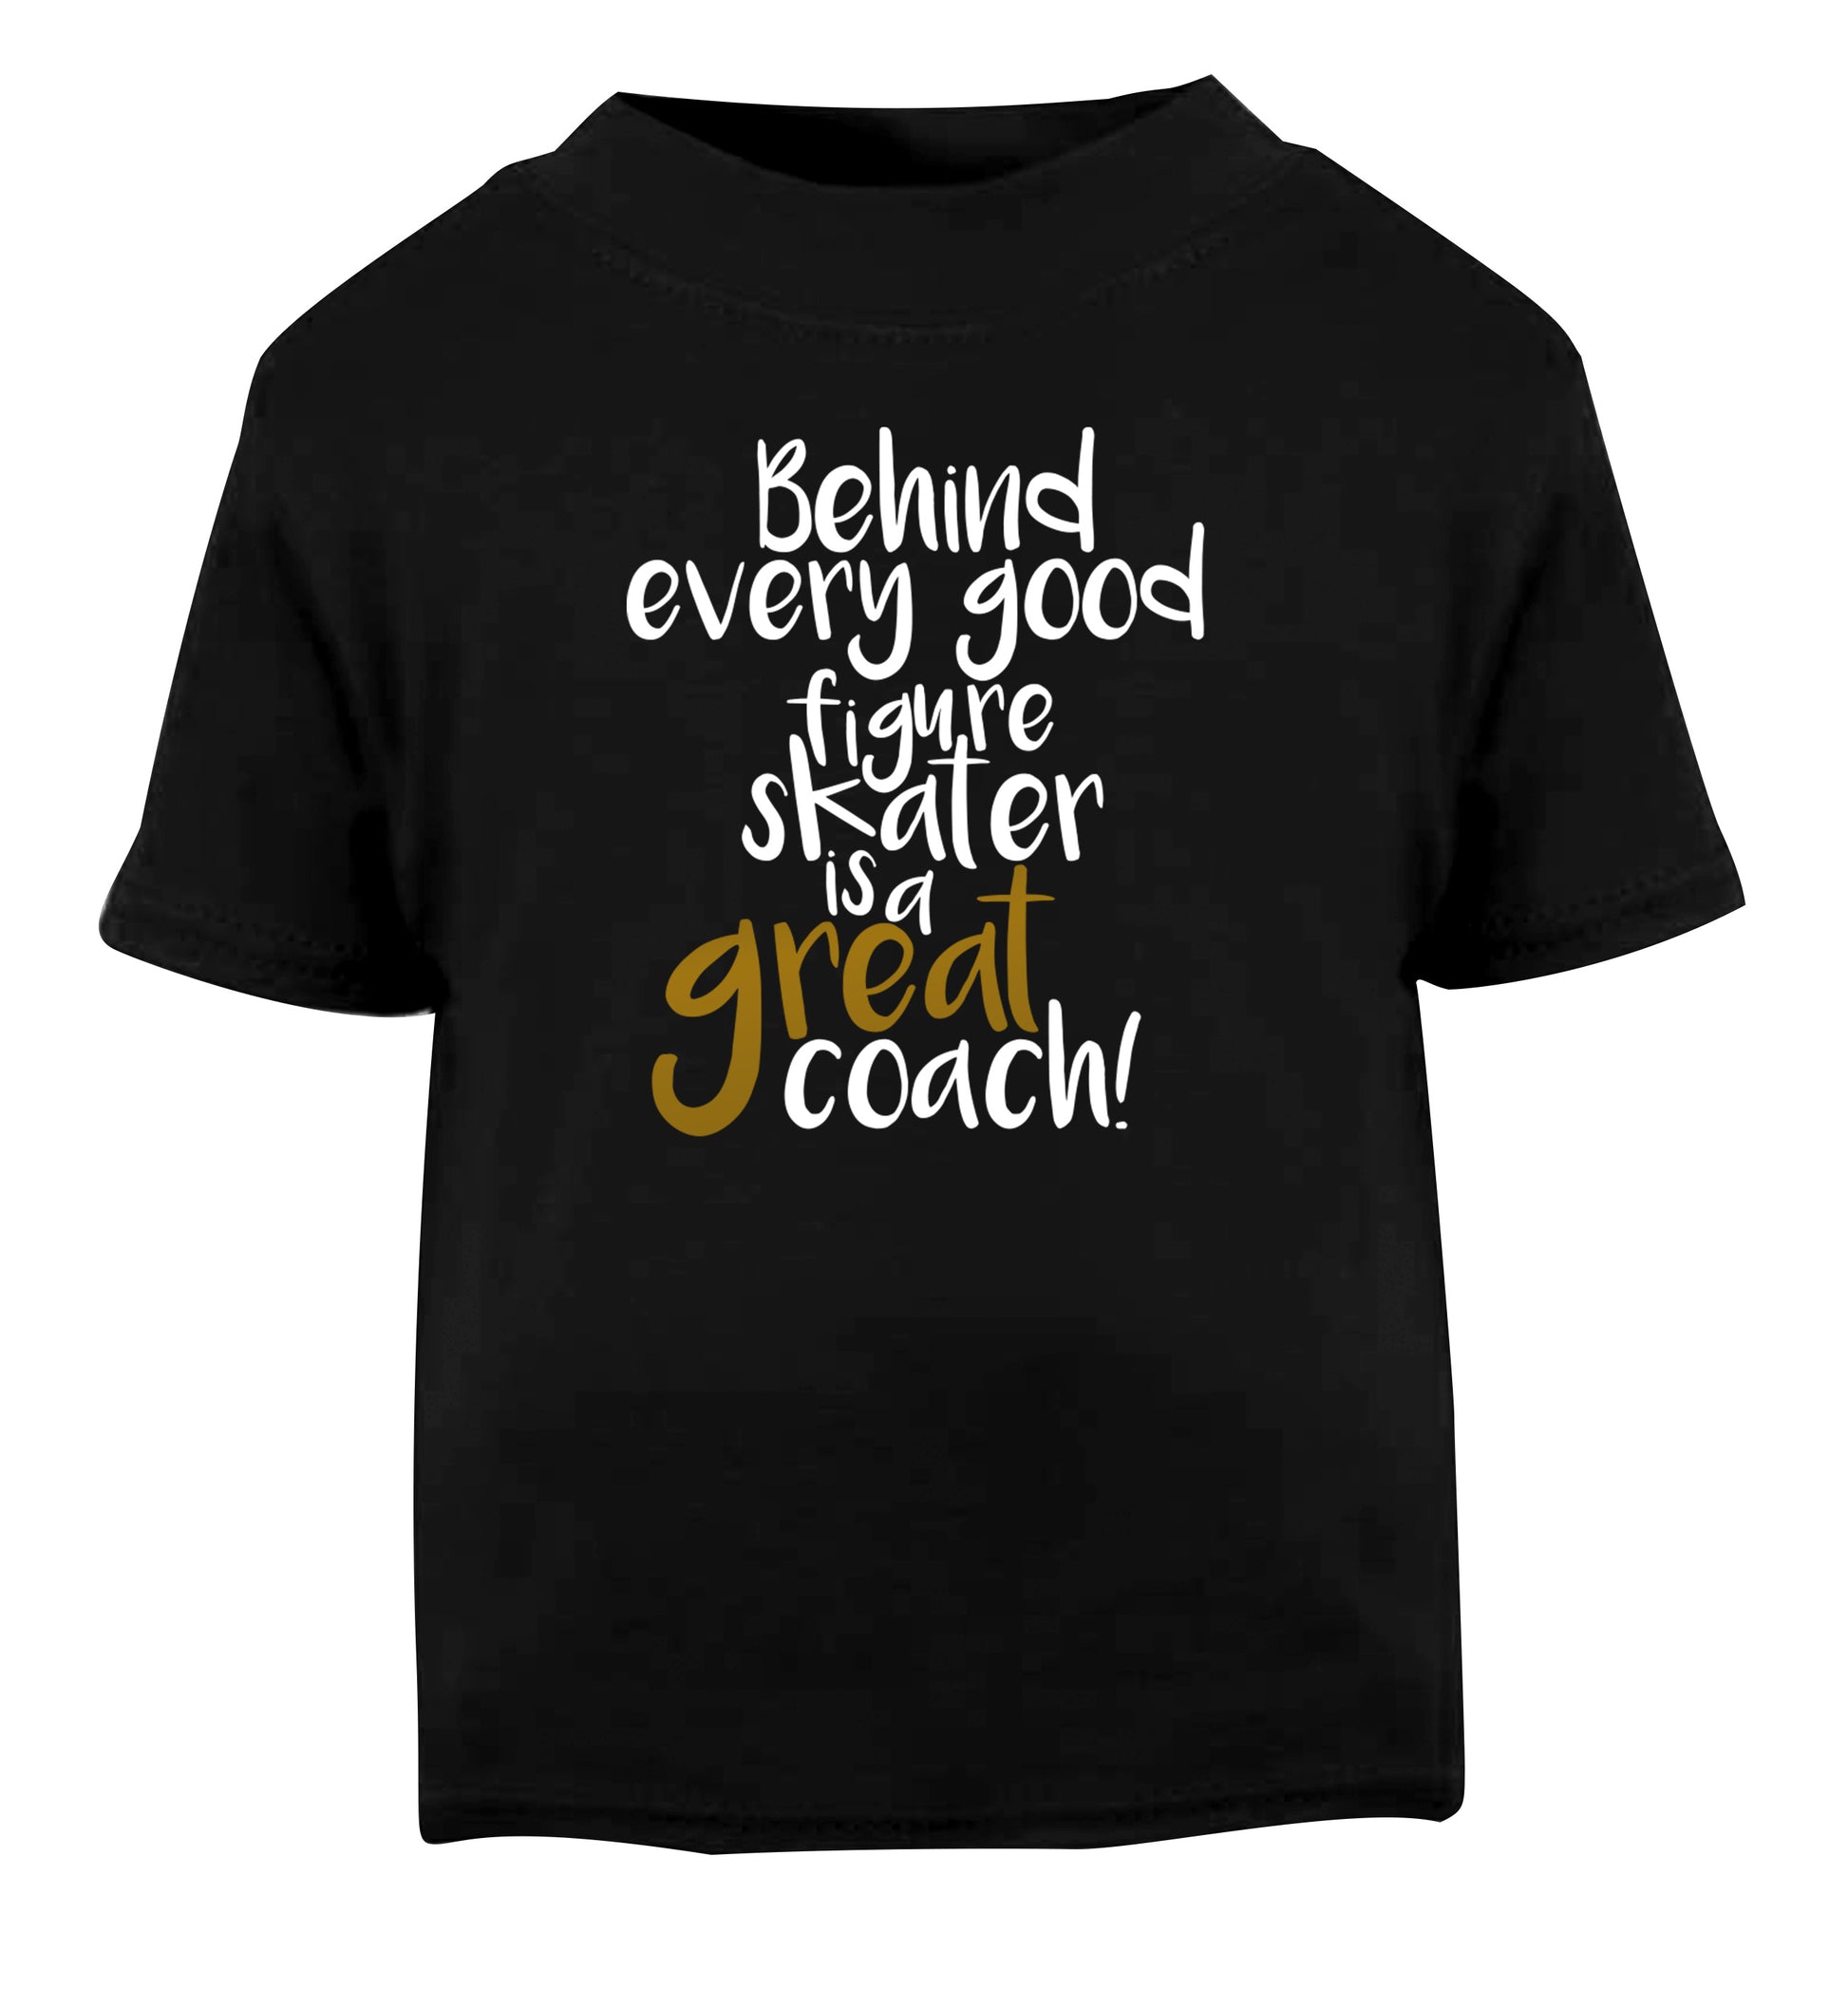 Behind every good figure skater is a great coach Black Baby Toddler Tshirt 2 years